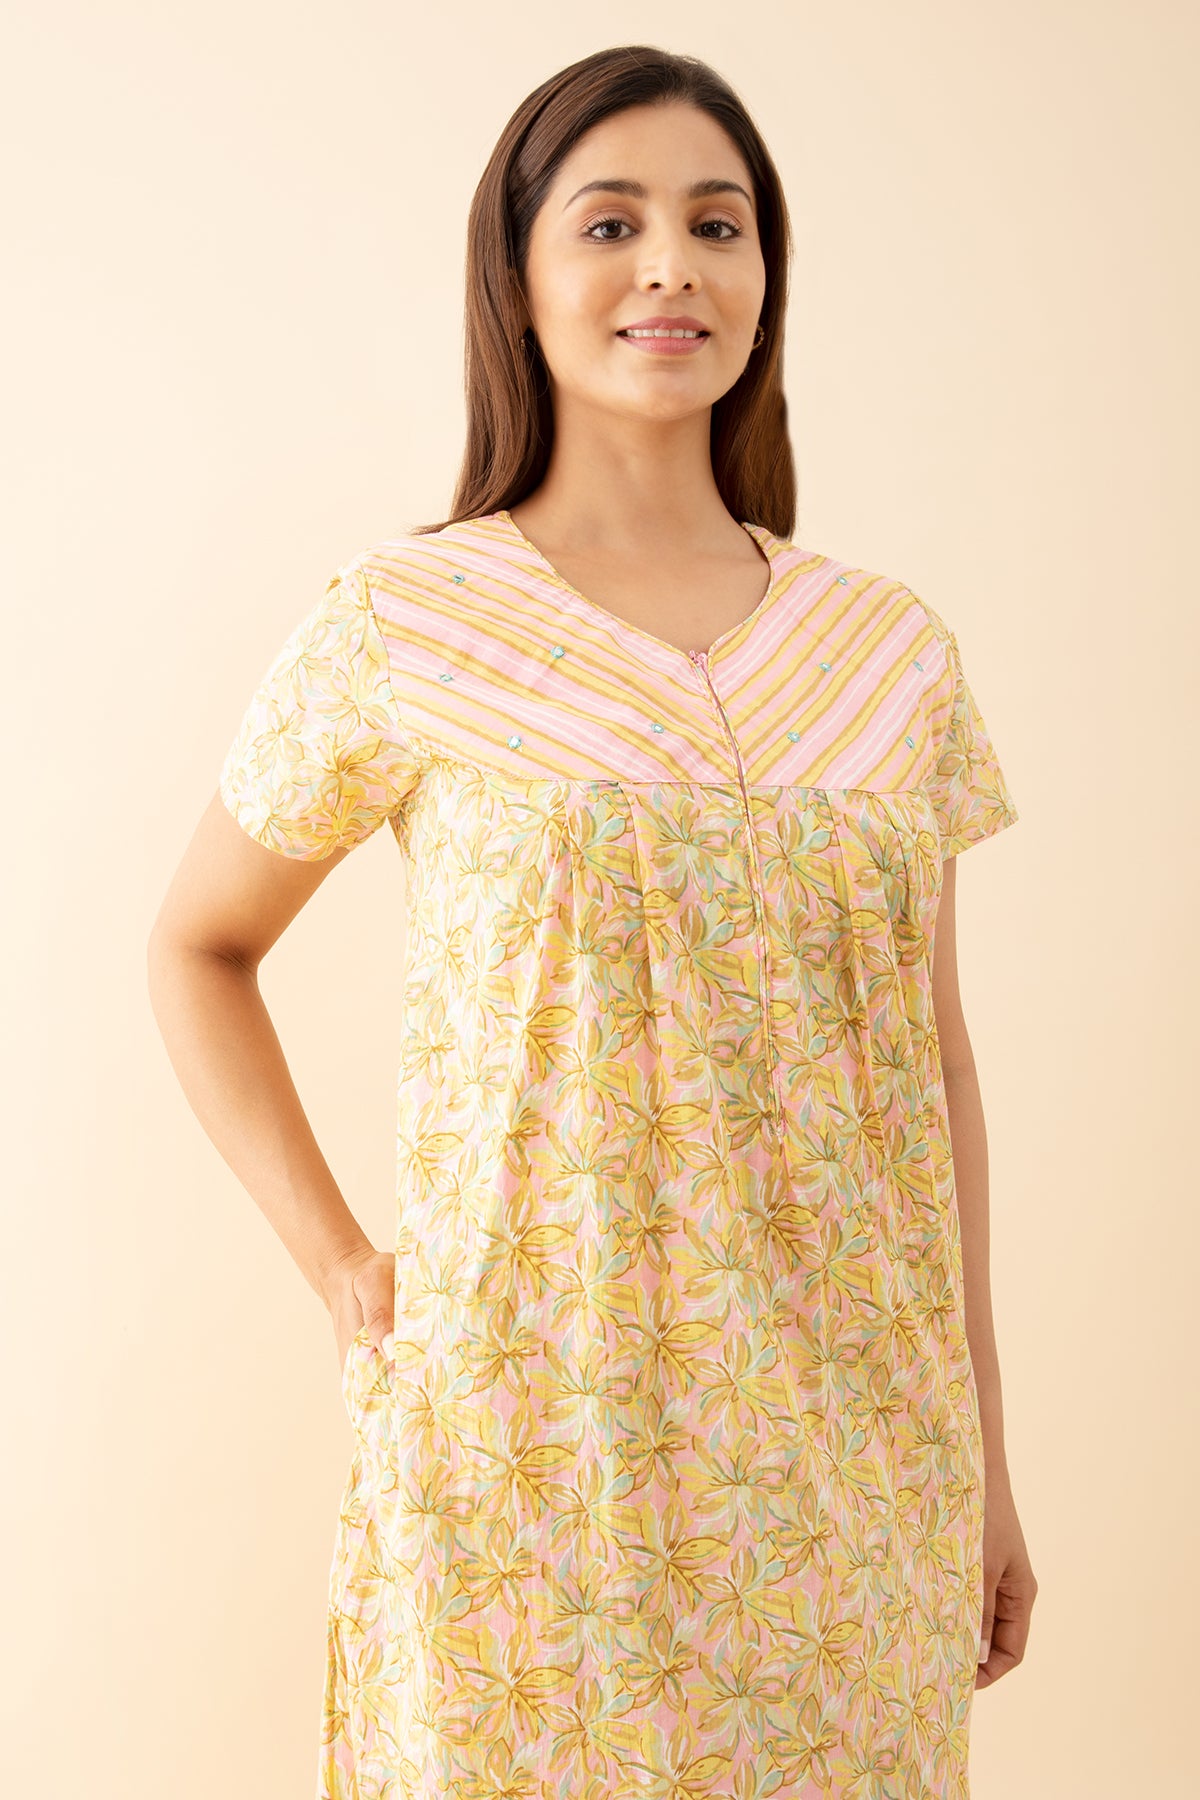 Buttercup Floral Printed Nighty with Stripes Printed Yoke - Pink